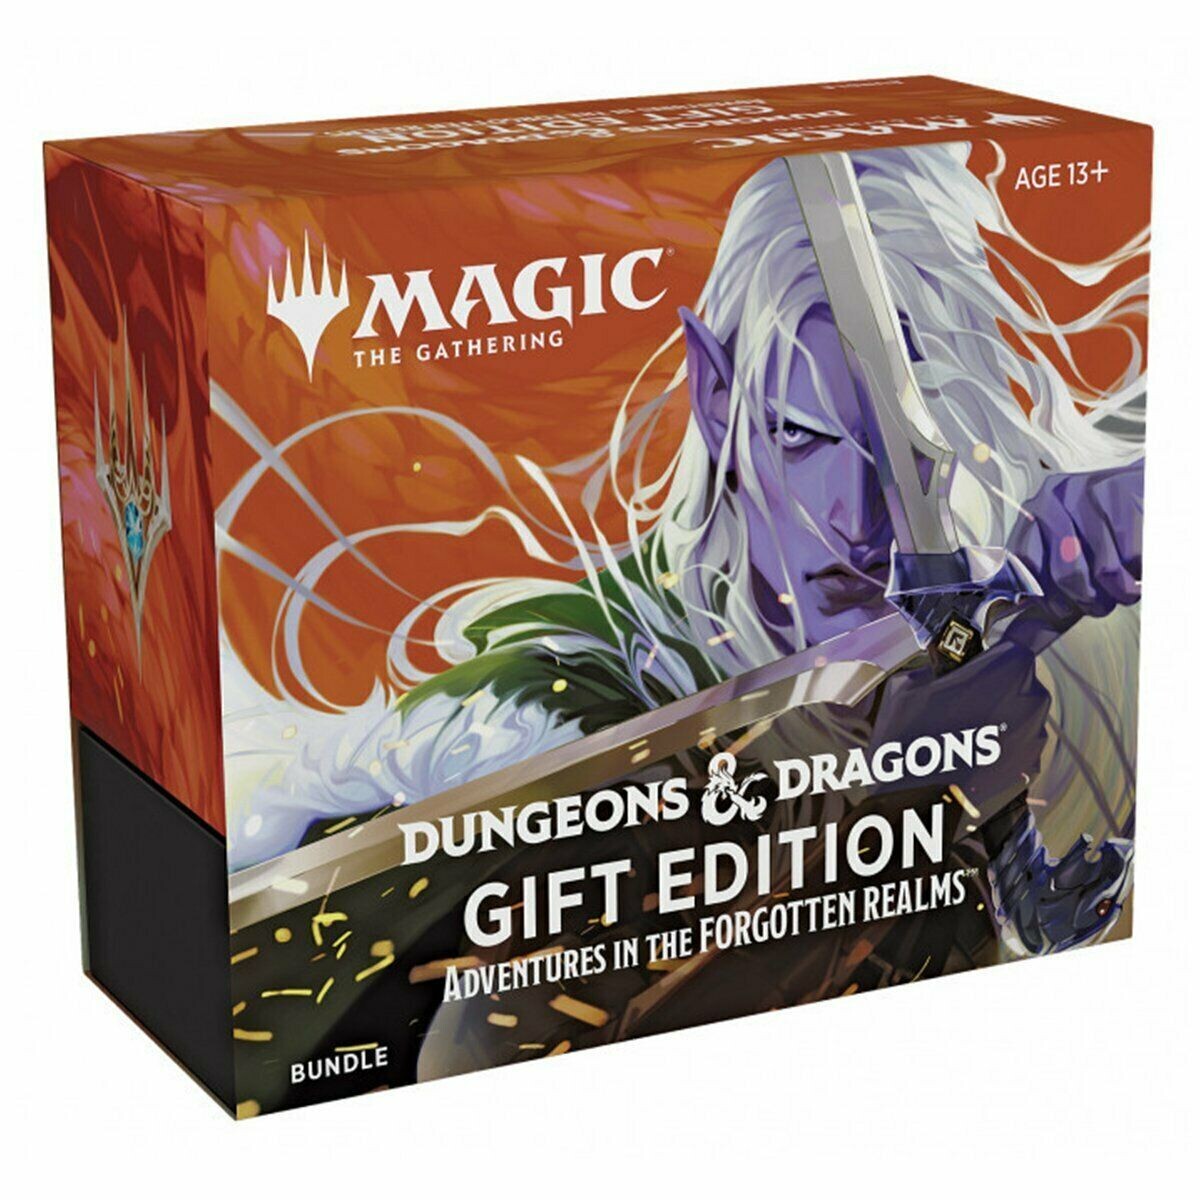 Dungeons & Dragons Gift Edition Forgotten Realms Bundle